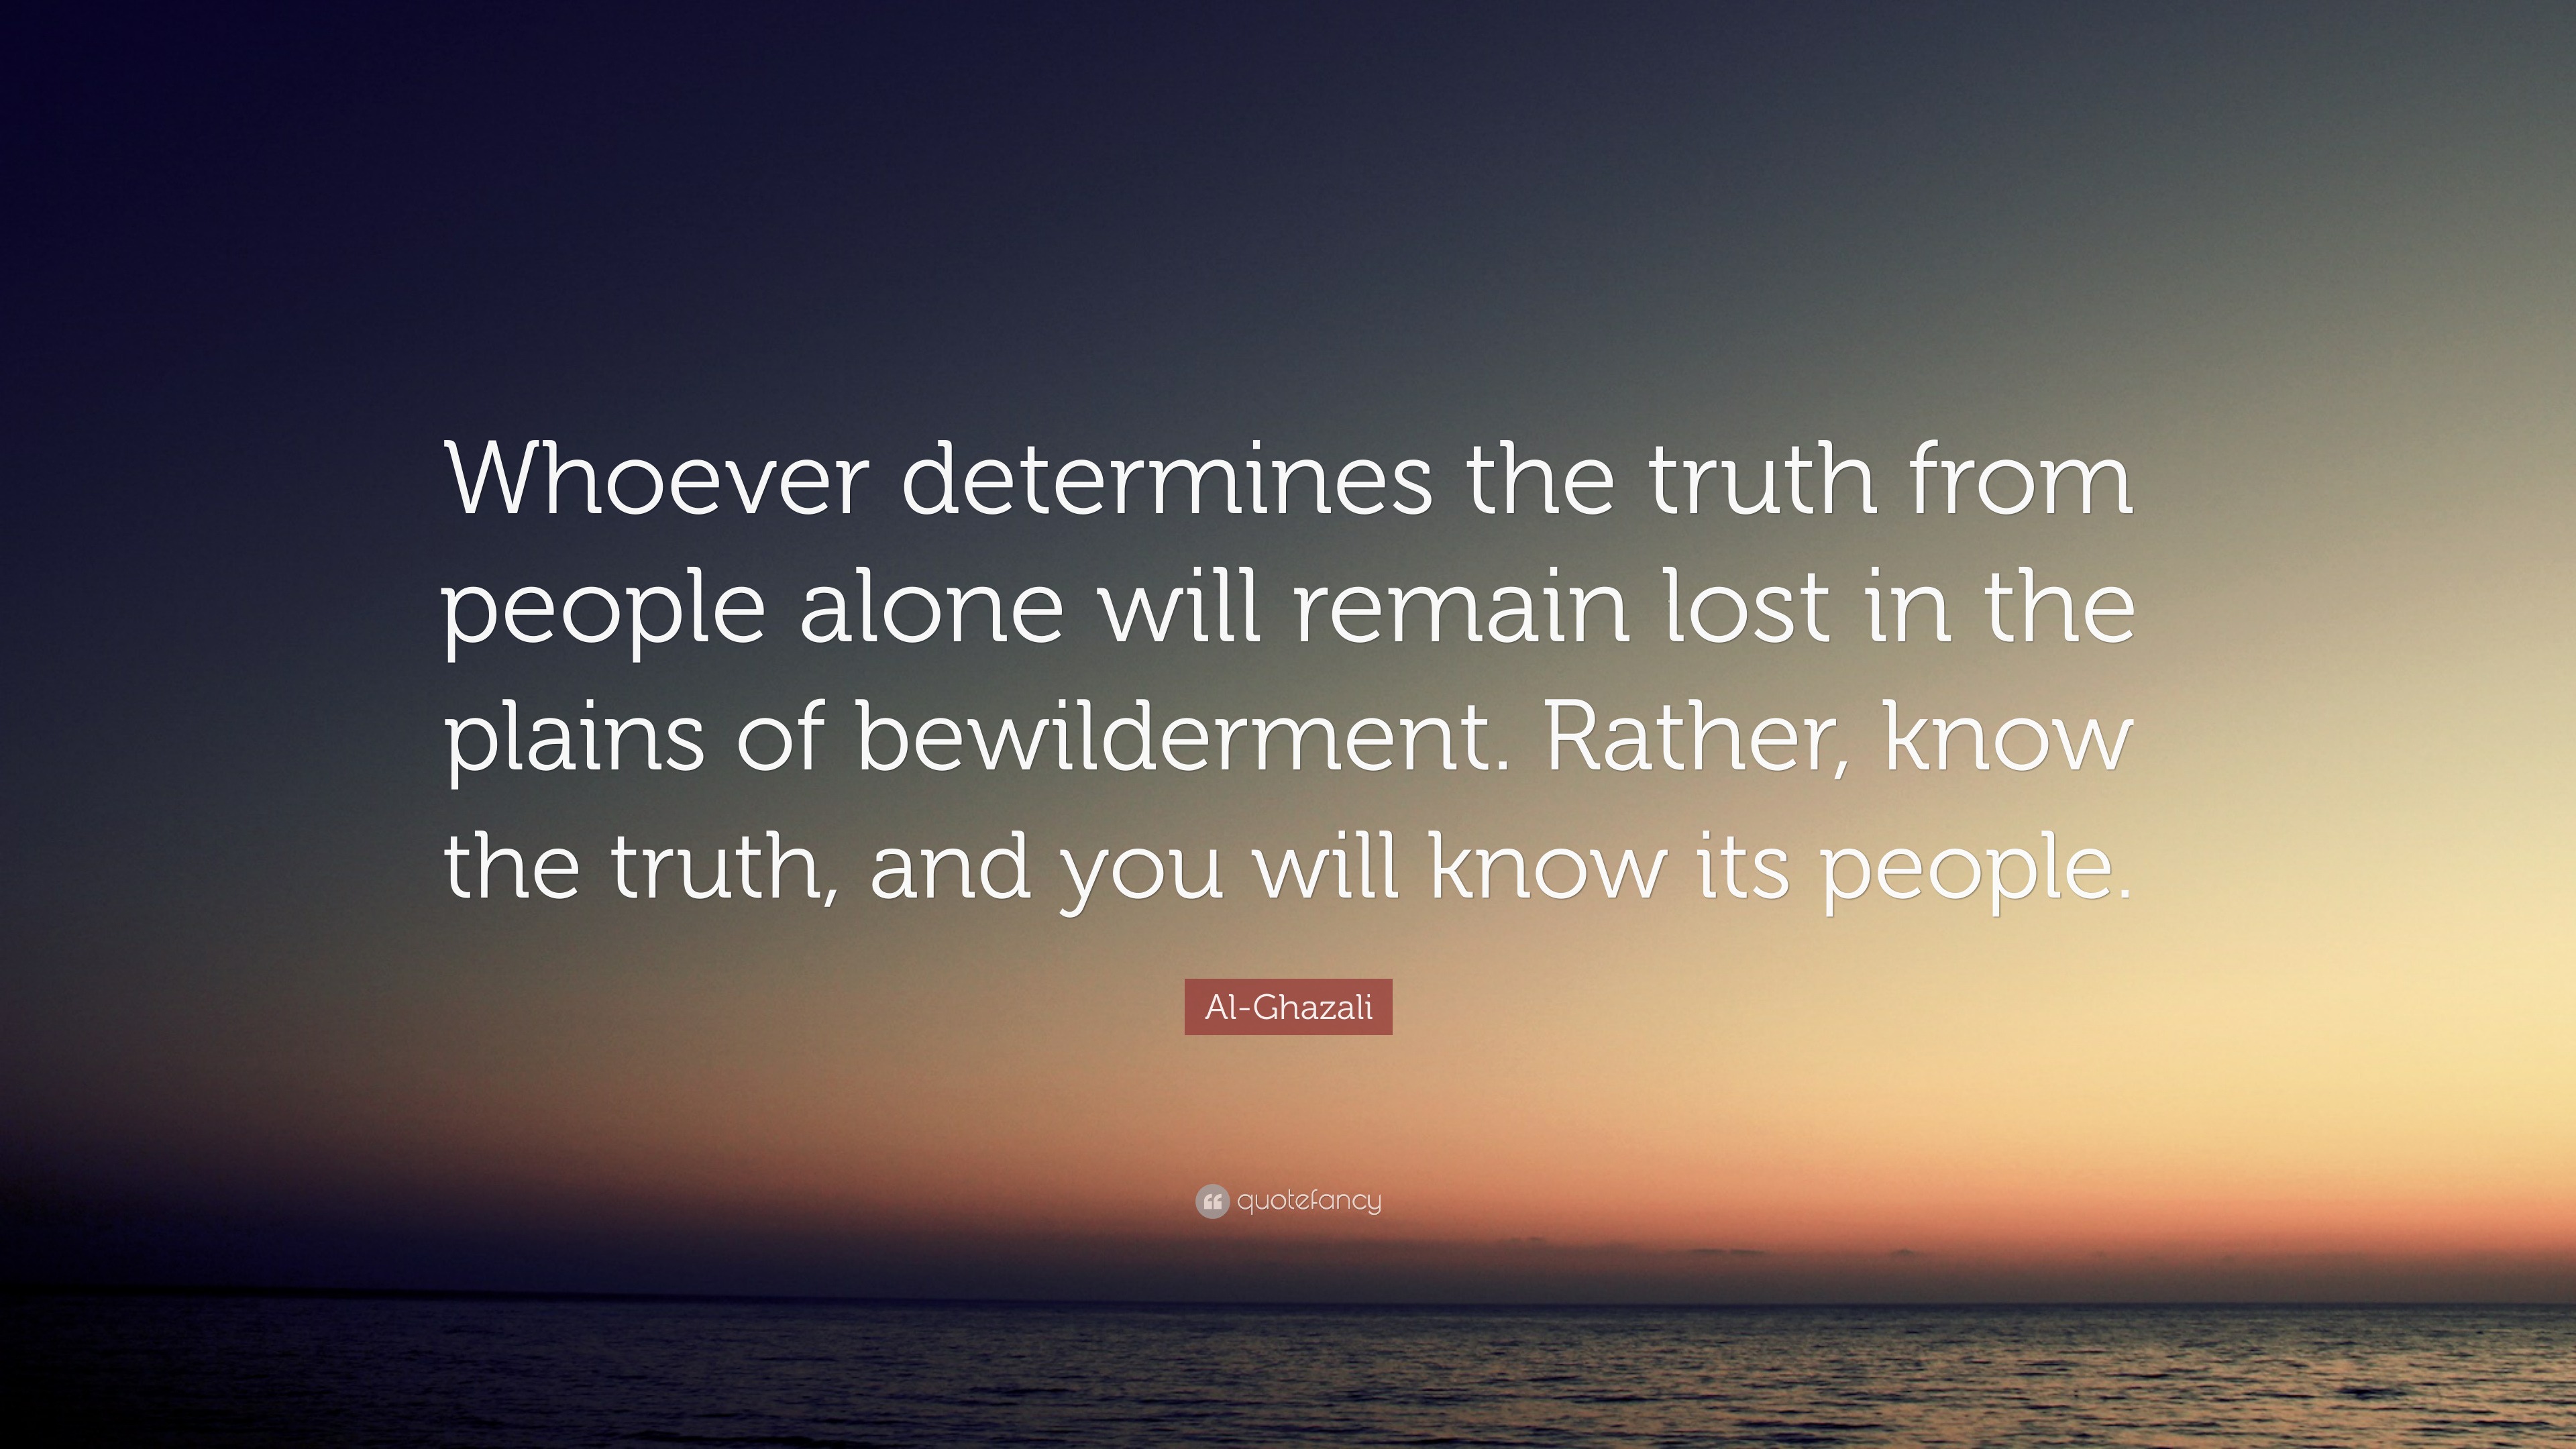 Al-Ghazali Quote: “Whoever determines the truth from people alone will ...